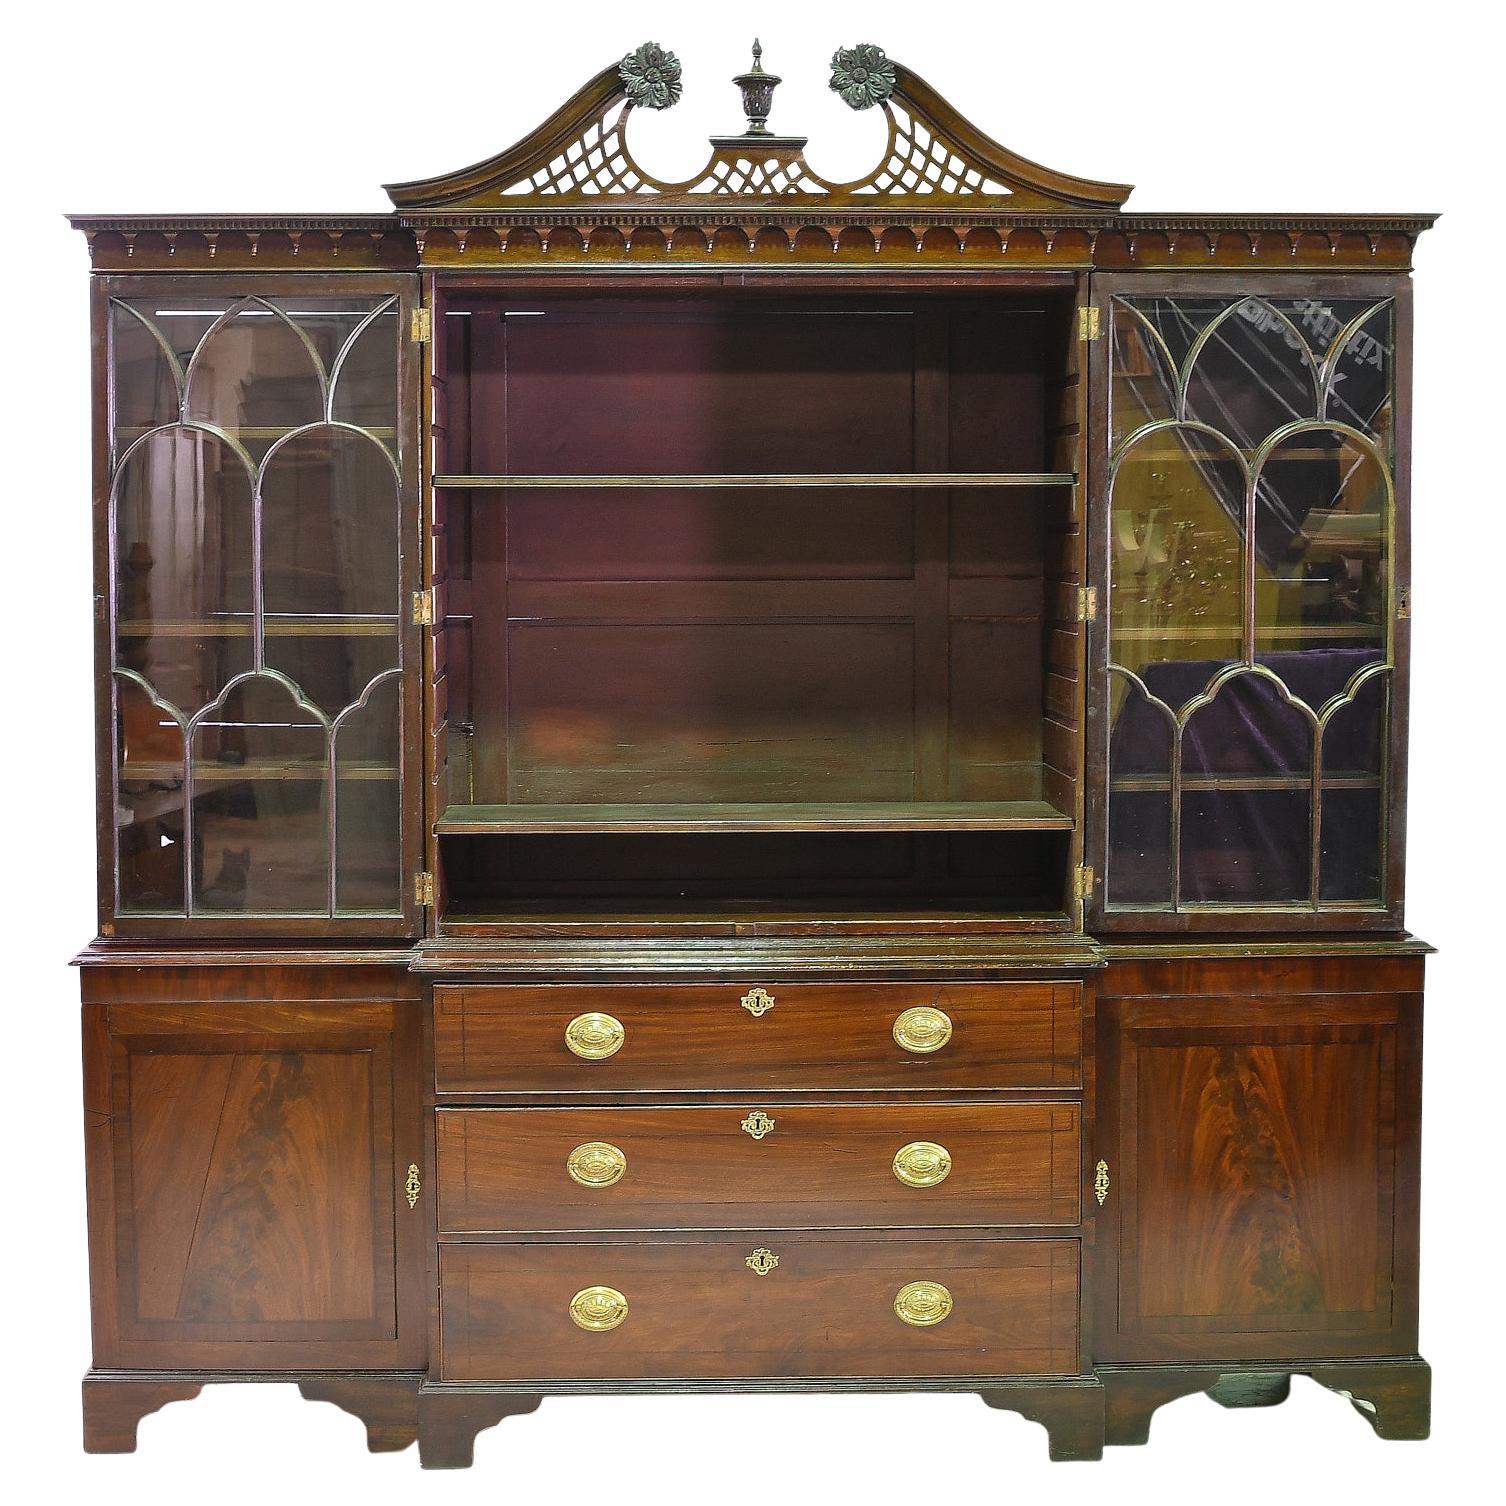 A handsome Georgian-style breakfront bookcase in fine mahogany with arched mullioned glazed panels & a scrolled lattice pediment top with dentil crown molding, below which are carved pendants. The projecting center section offers three storage